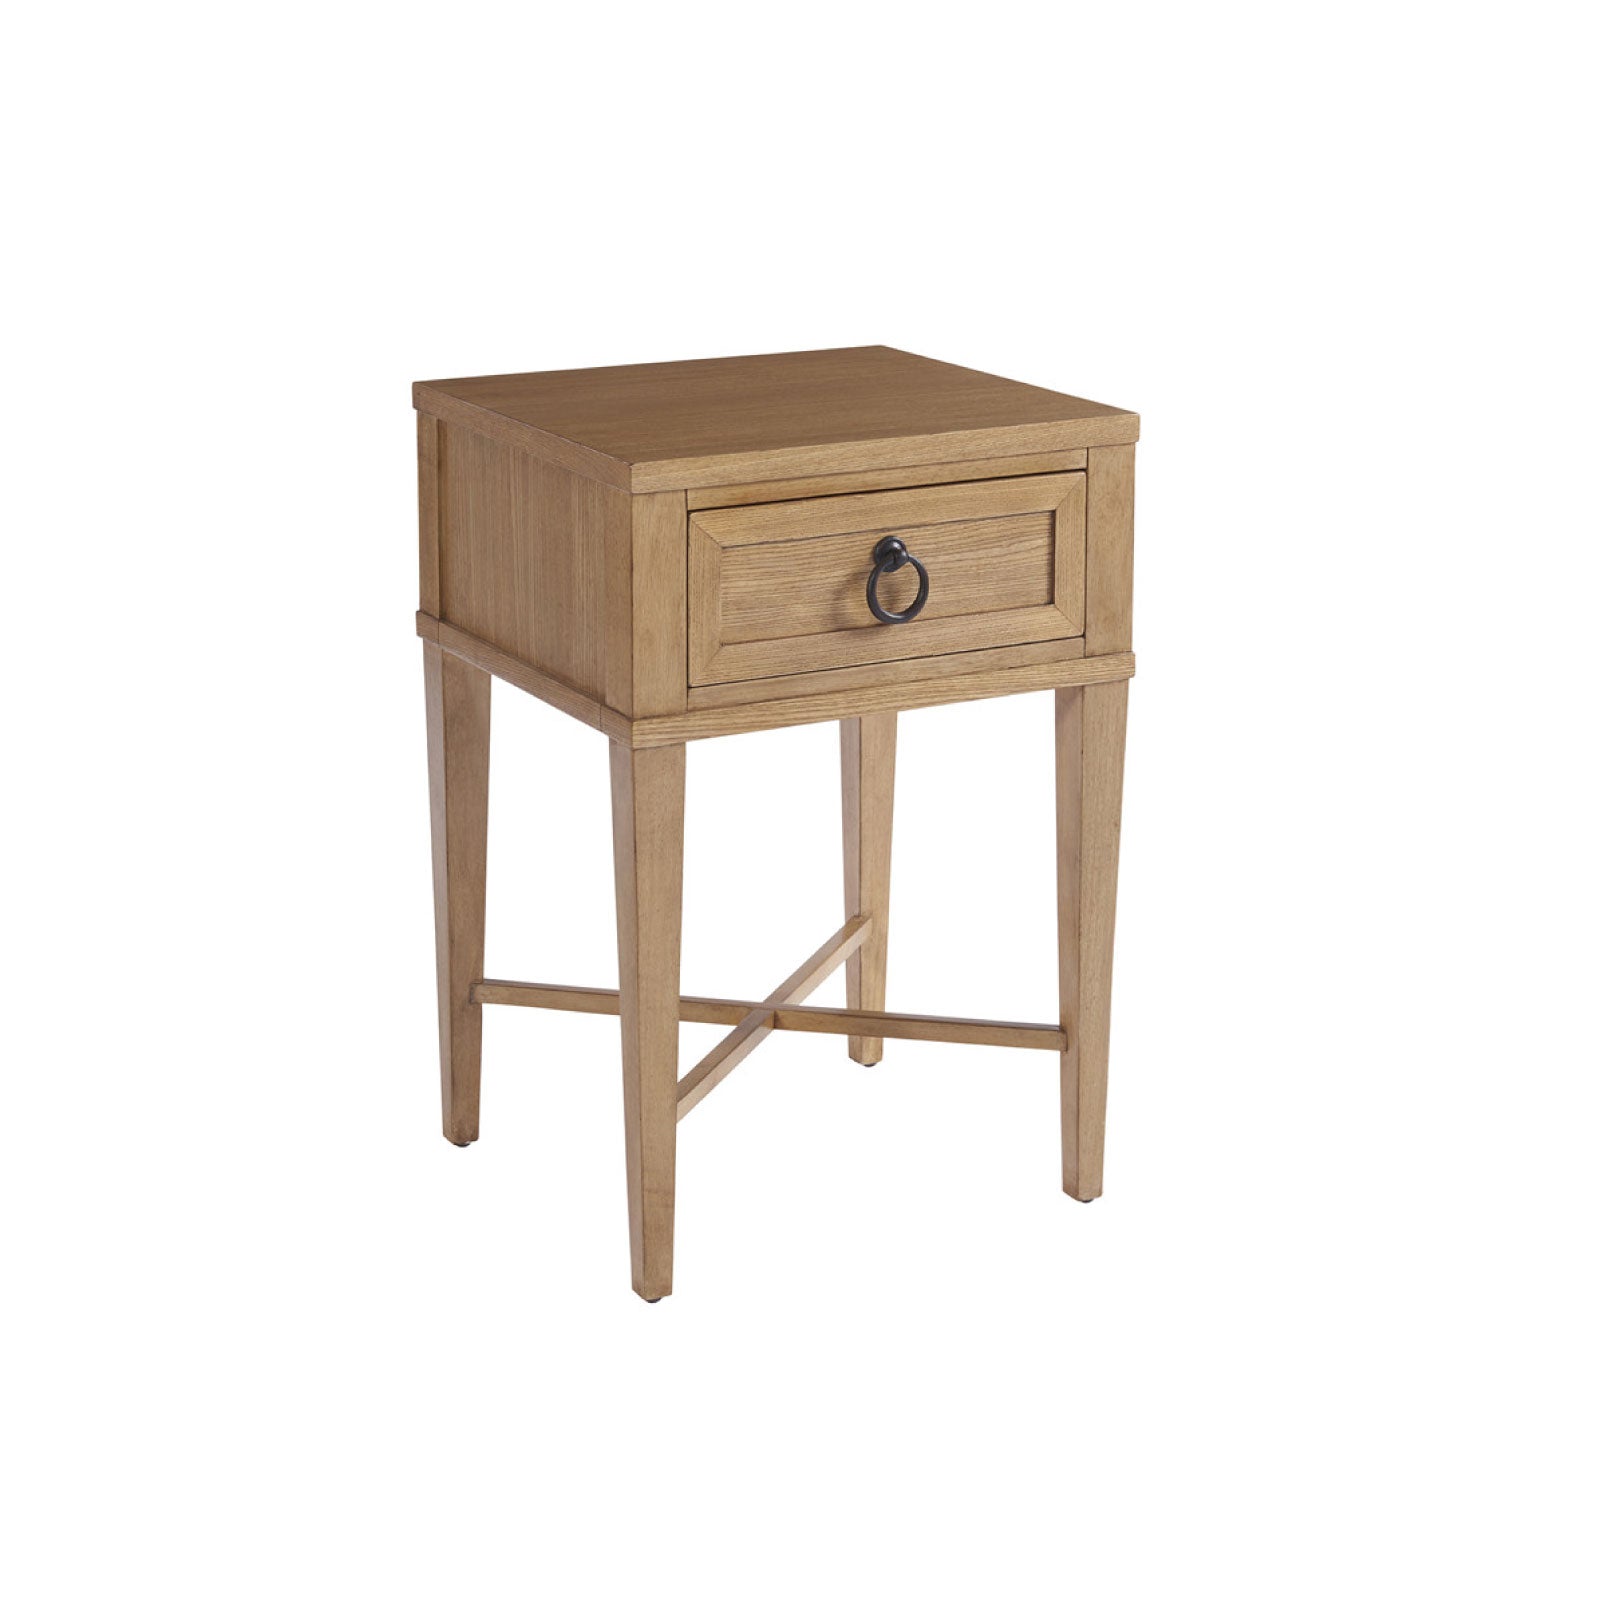 Light brown wood nightstand with one drawer featuring a circular drawer pull 